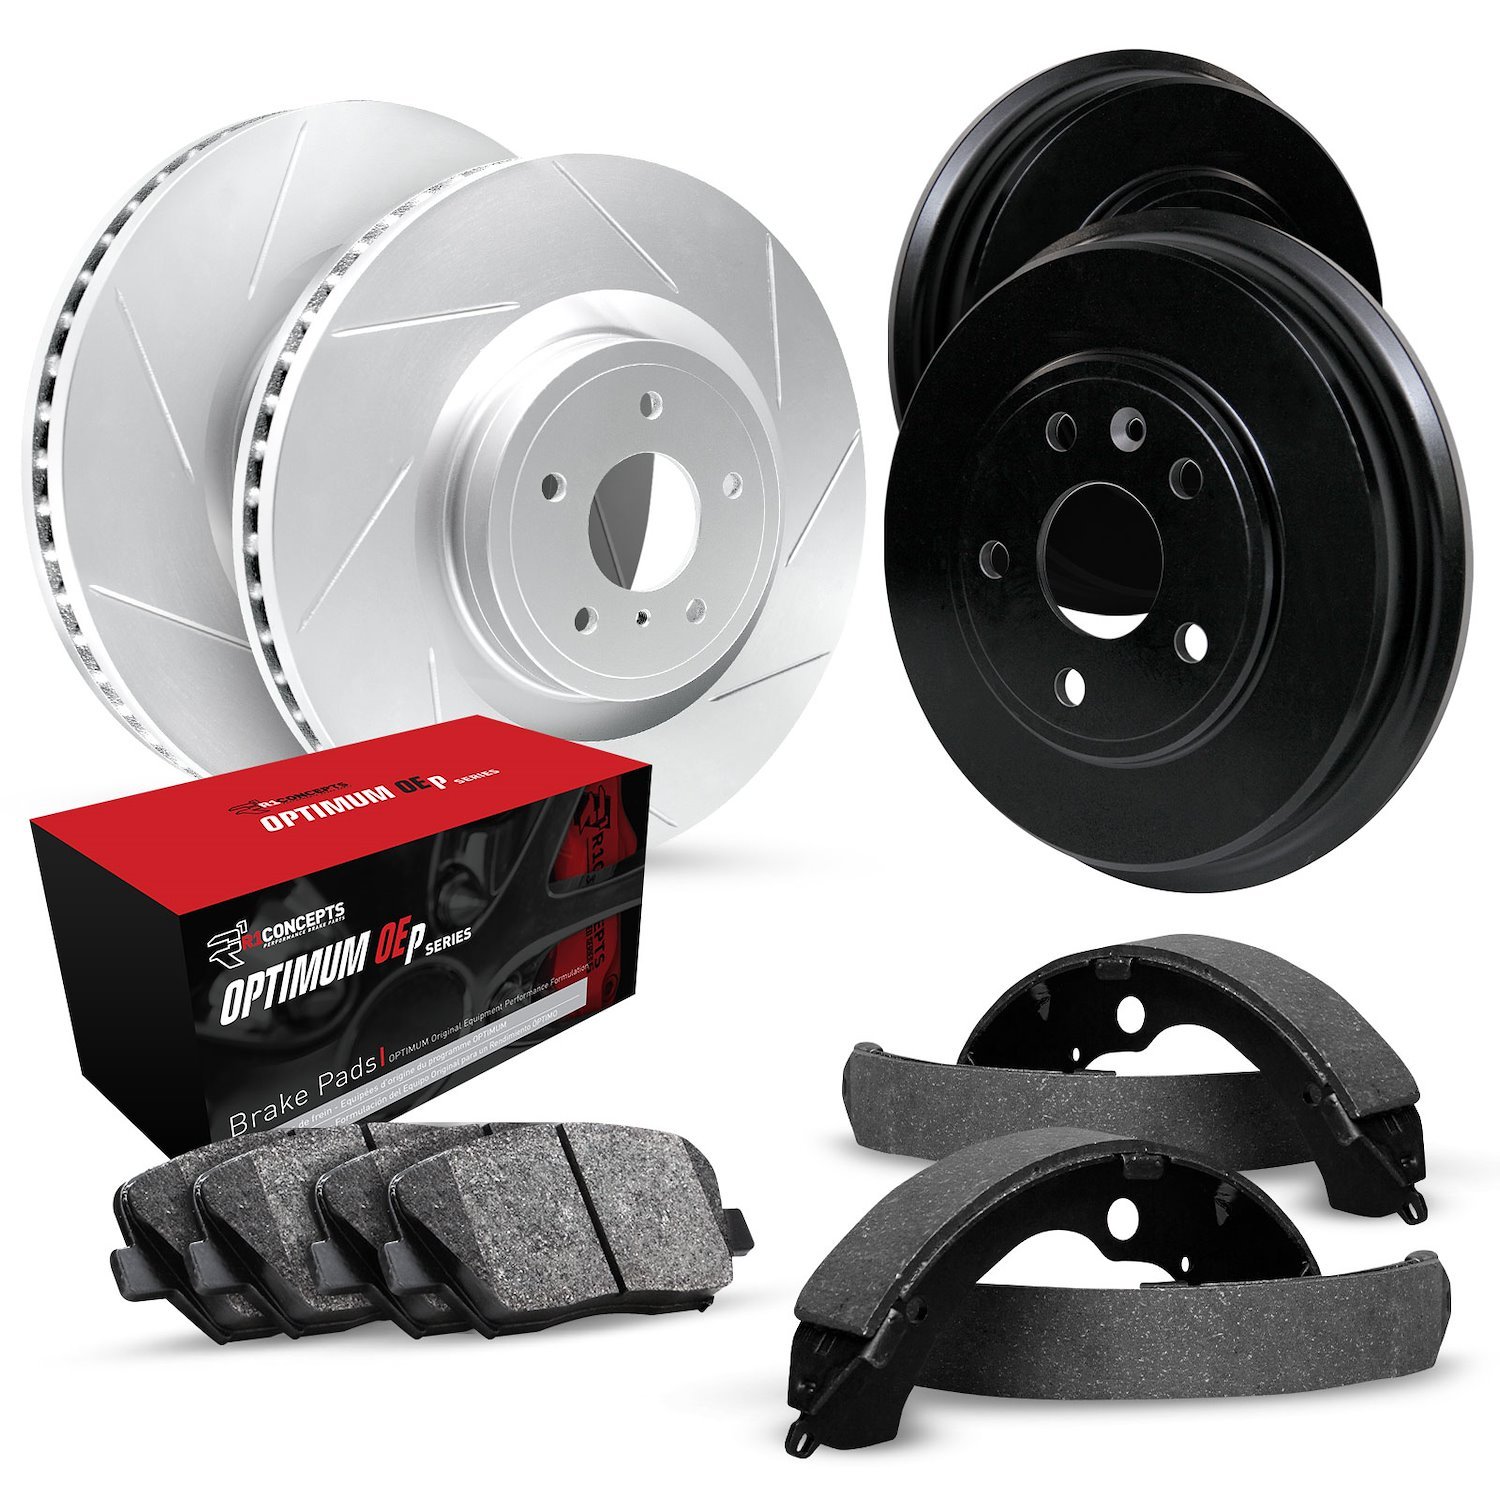 GEO-Carbon Slotted Brake Rotor & Drum Set w/Optimum OE Pads & Shoes, 1986-1993 Ford/Lincoln/Mercury/Mazda